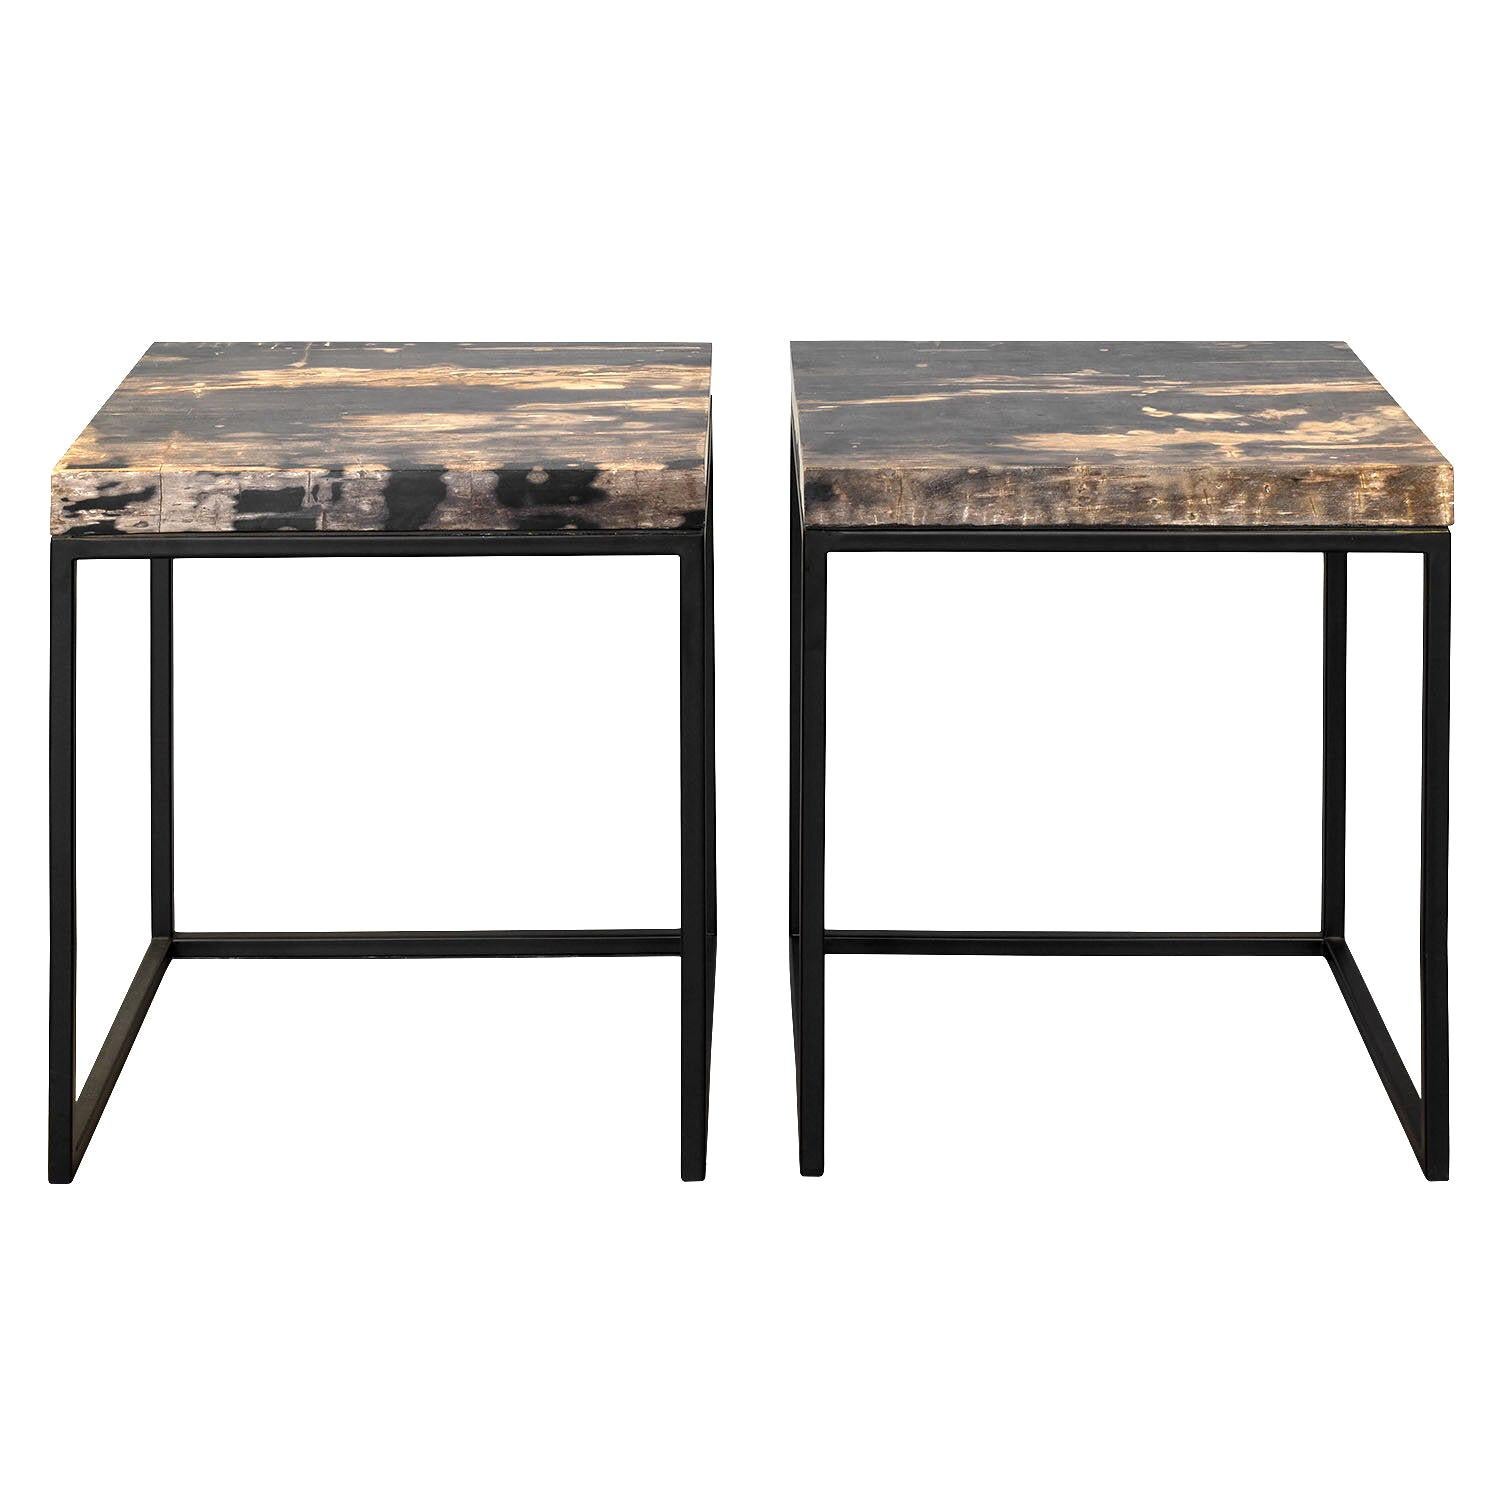 Set of Two Side Tables with Petrified Wood Tabletops from Indonesia